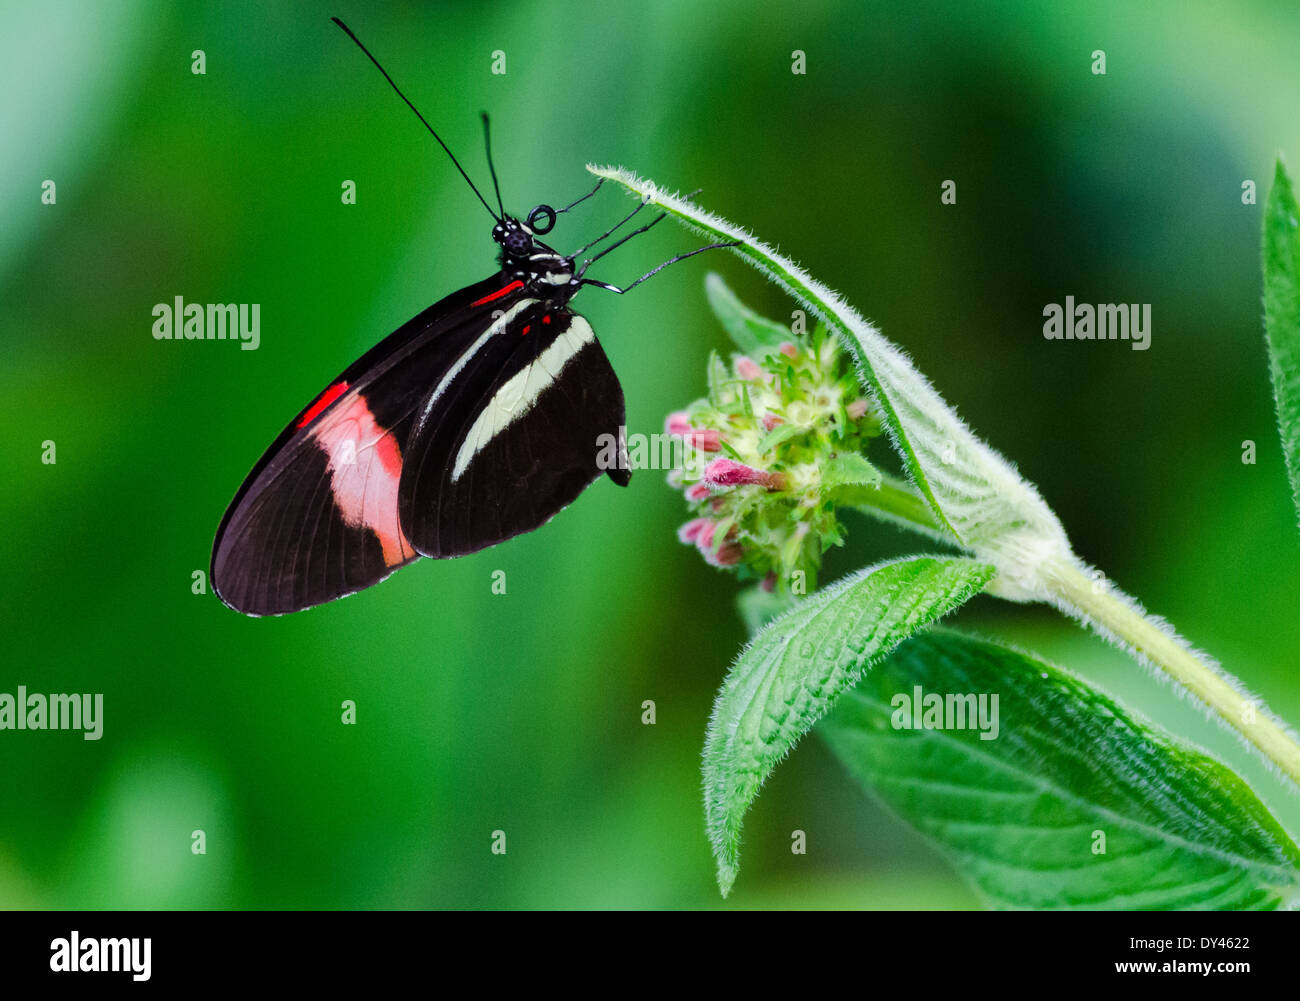 A butterfly on a green leaf. Monteverde, Costa Rica. Stock Photo